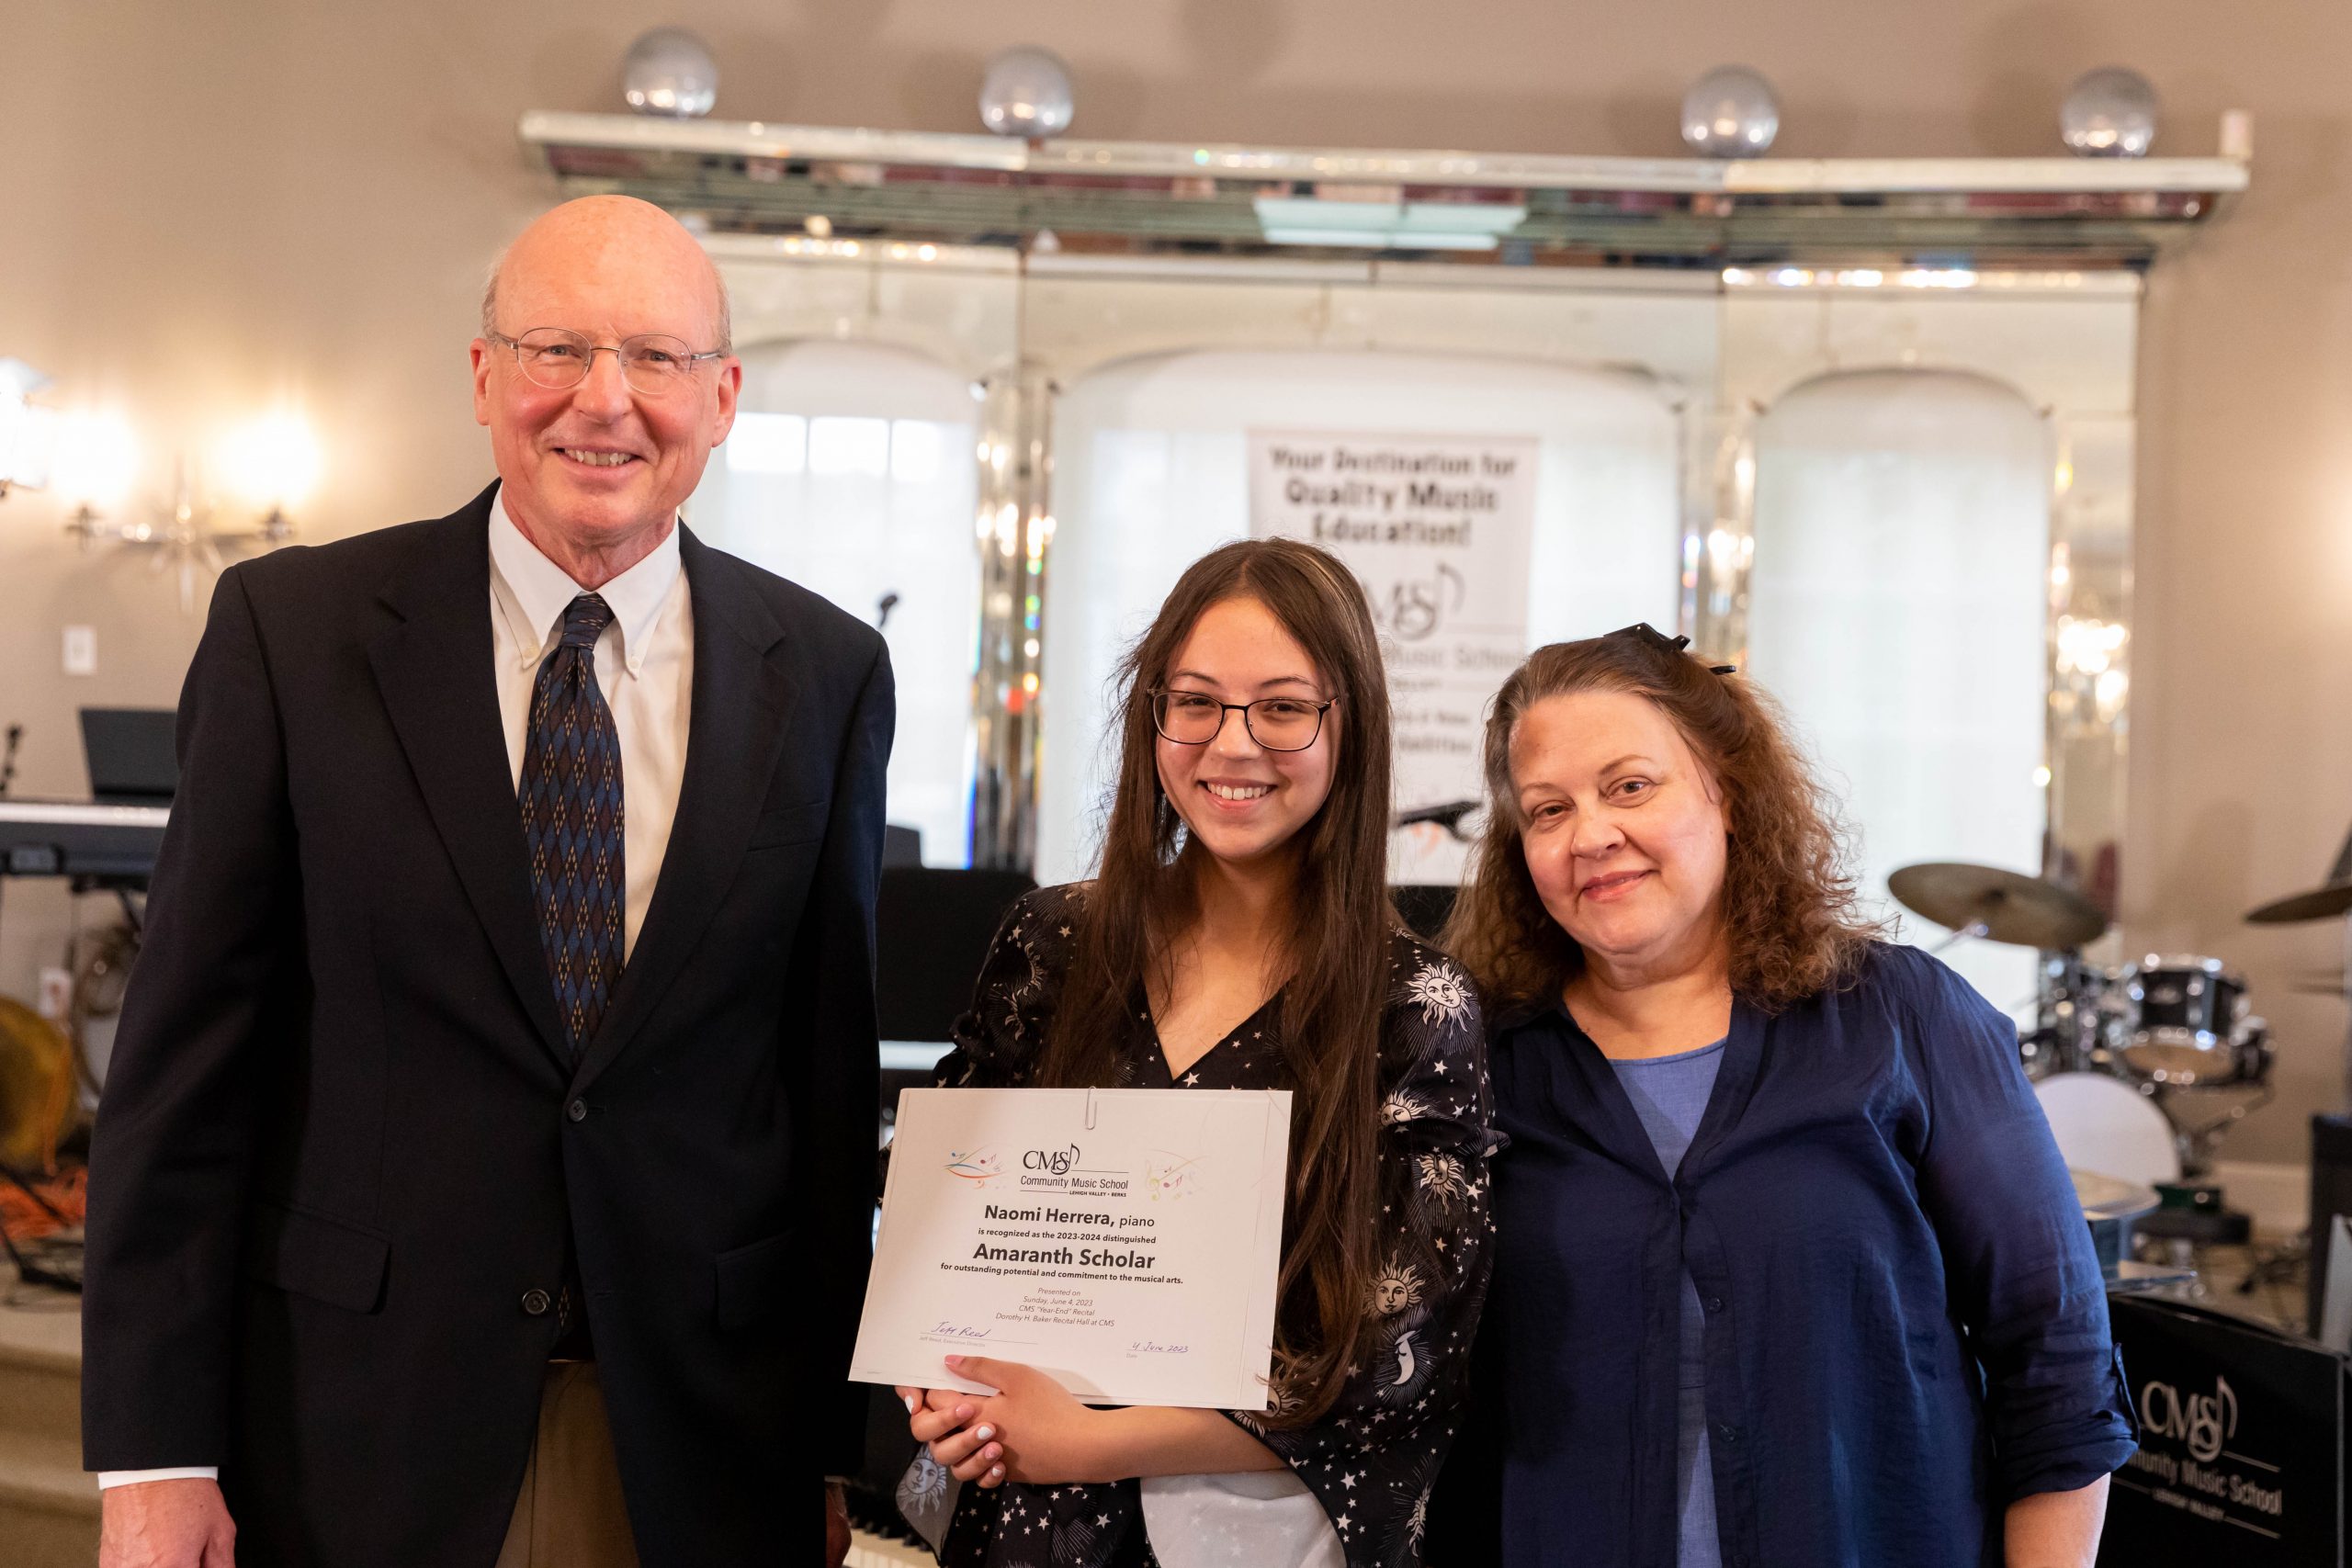 Naomi Herrera (center) was also recognized as the 2023-24 Amaranth Scholar for her outstanding dedication to her studies in piano, violin, and voice, here at CMS. Also pictured are Executive Director Jeff Reed (left), and Naomi’s piano teacher, Kathy Anthony (right). The Amaranth Foundation Scholarship is awarded to a CMS student who demonstrates a high potential for achieving excellence in music education and whose family has documented financial need. The Amaranth Foundation was founded by Joan Miller Moran and supports arts-related programming and organizations, including Community Music School.